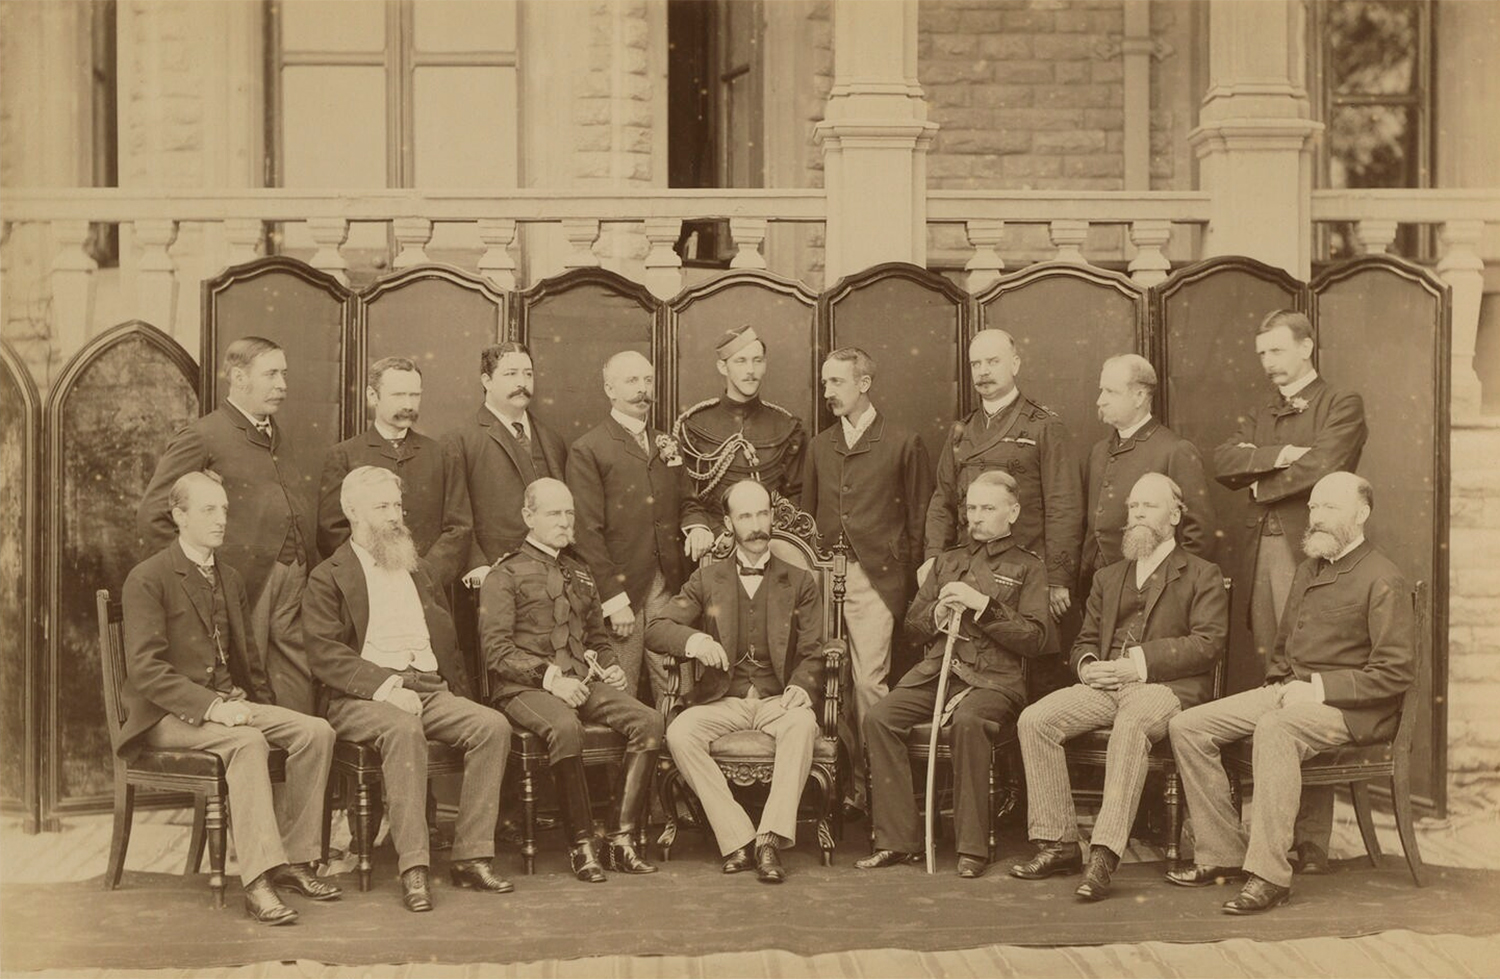 A sepia-toned group photograph of civil servants of the British administration in India.